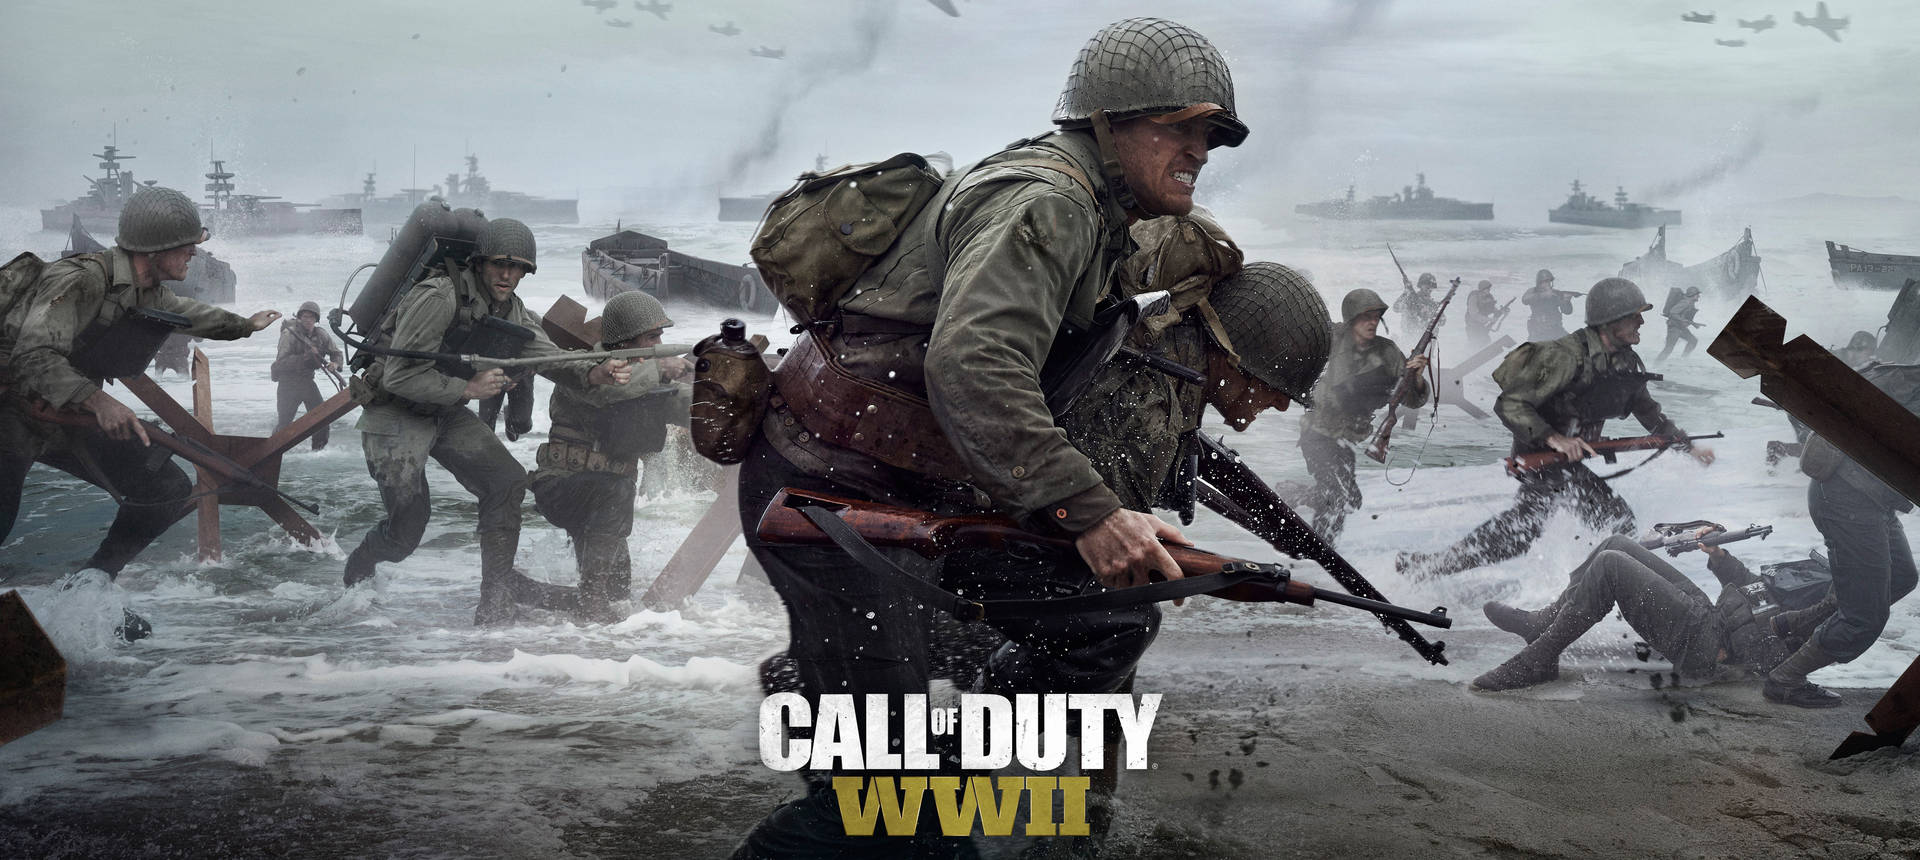 7190X3220 Ww2 Wallpaper and Background